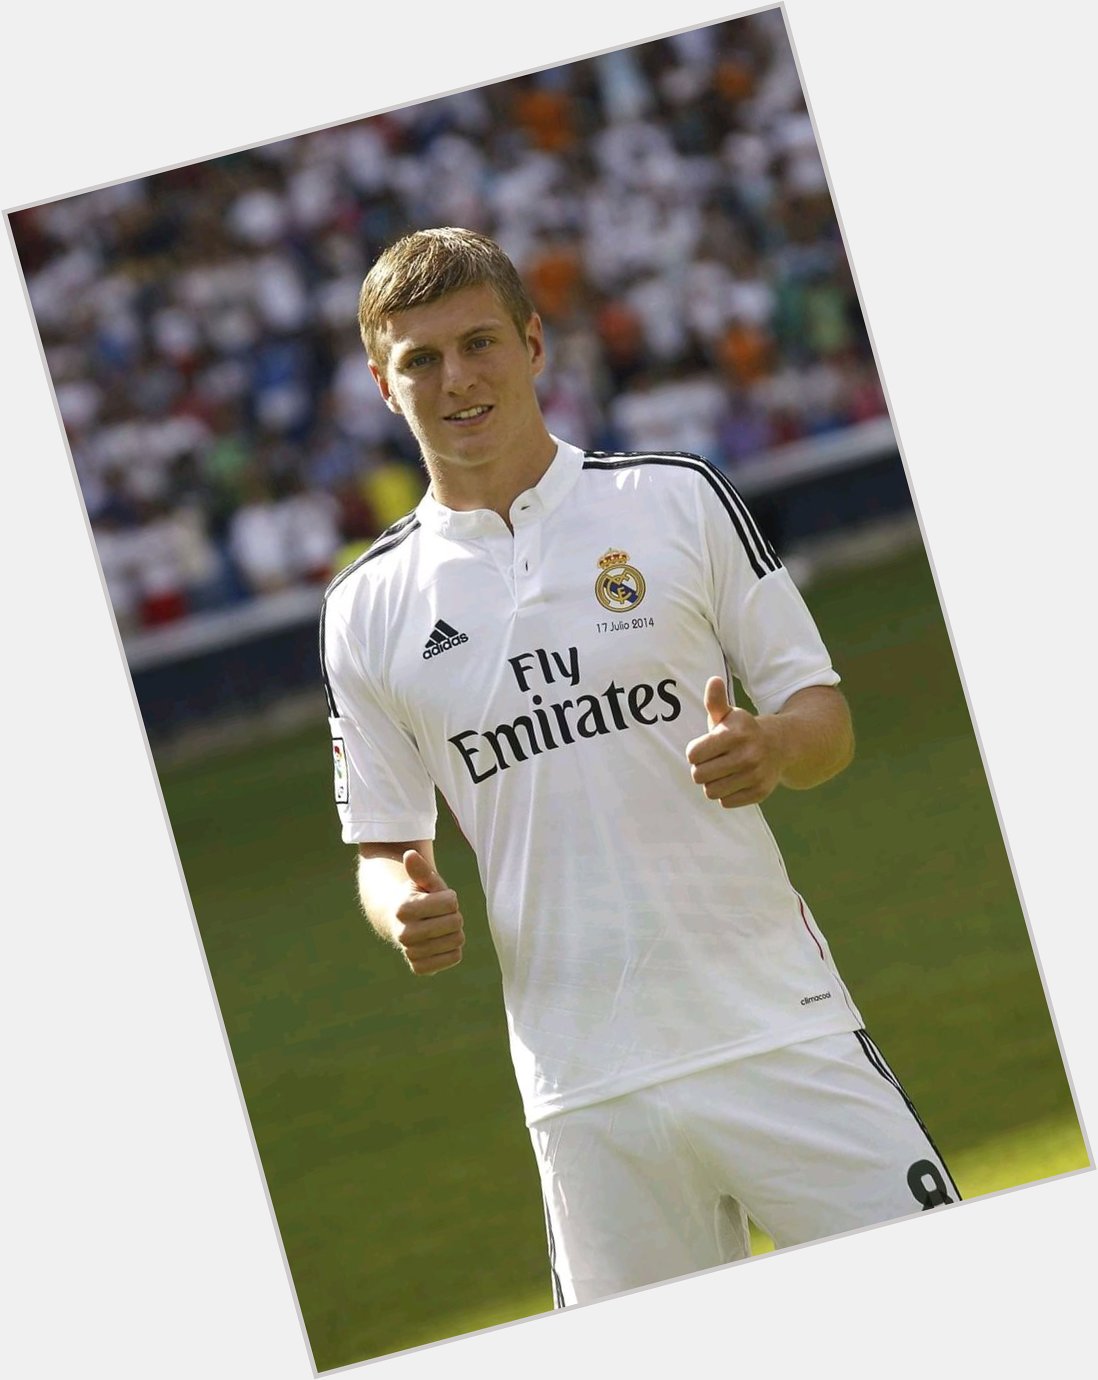 Toni Kroos turns 21 today. 

Happy birthday to one of the greatest midfielder football has ever seen   